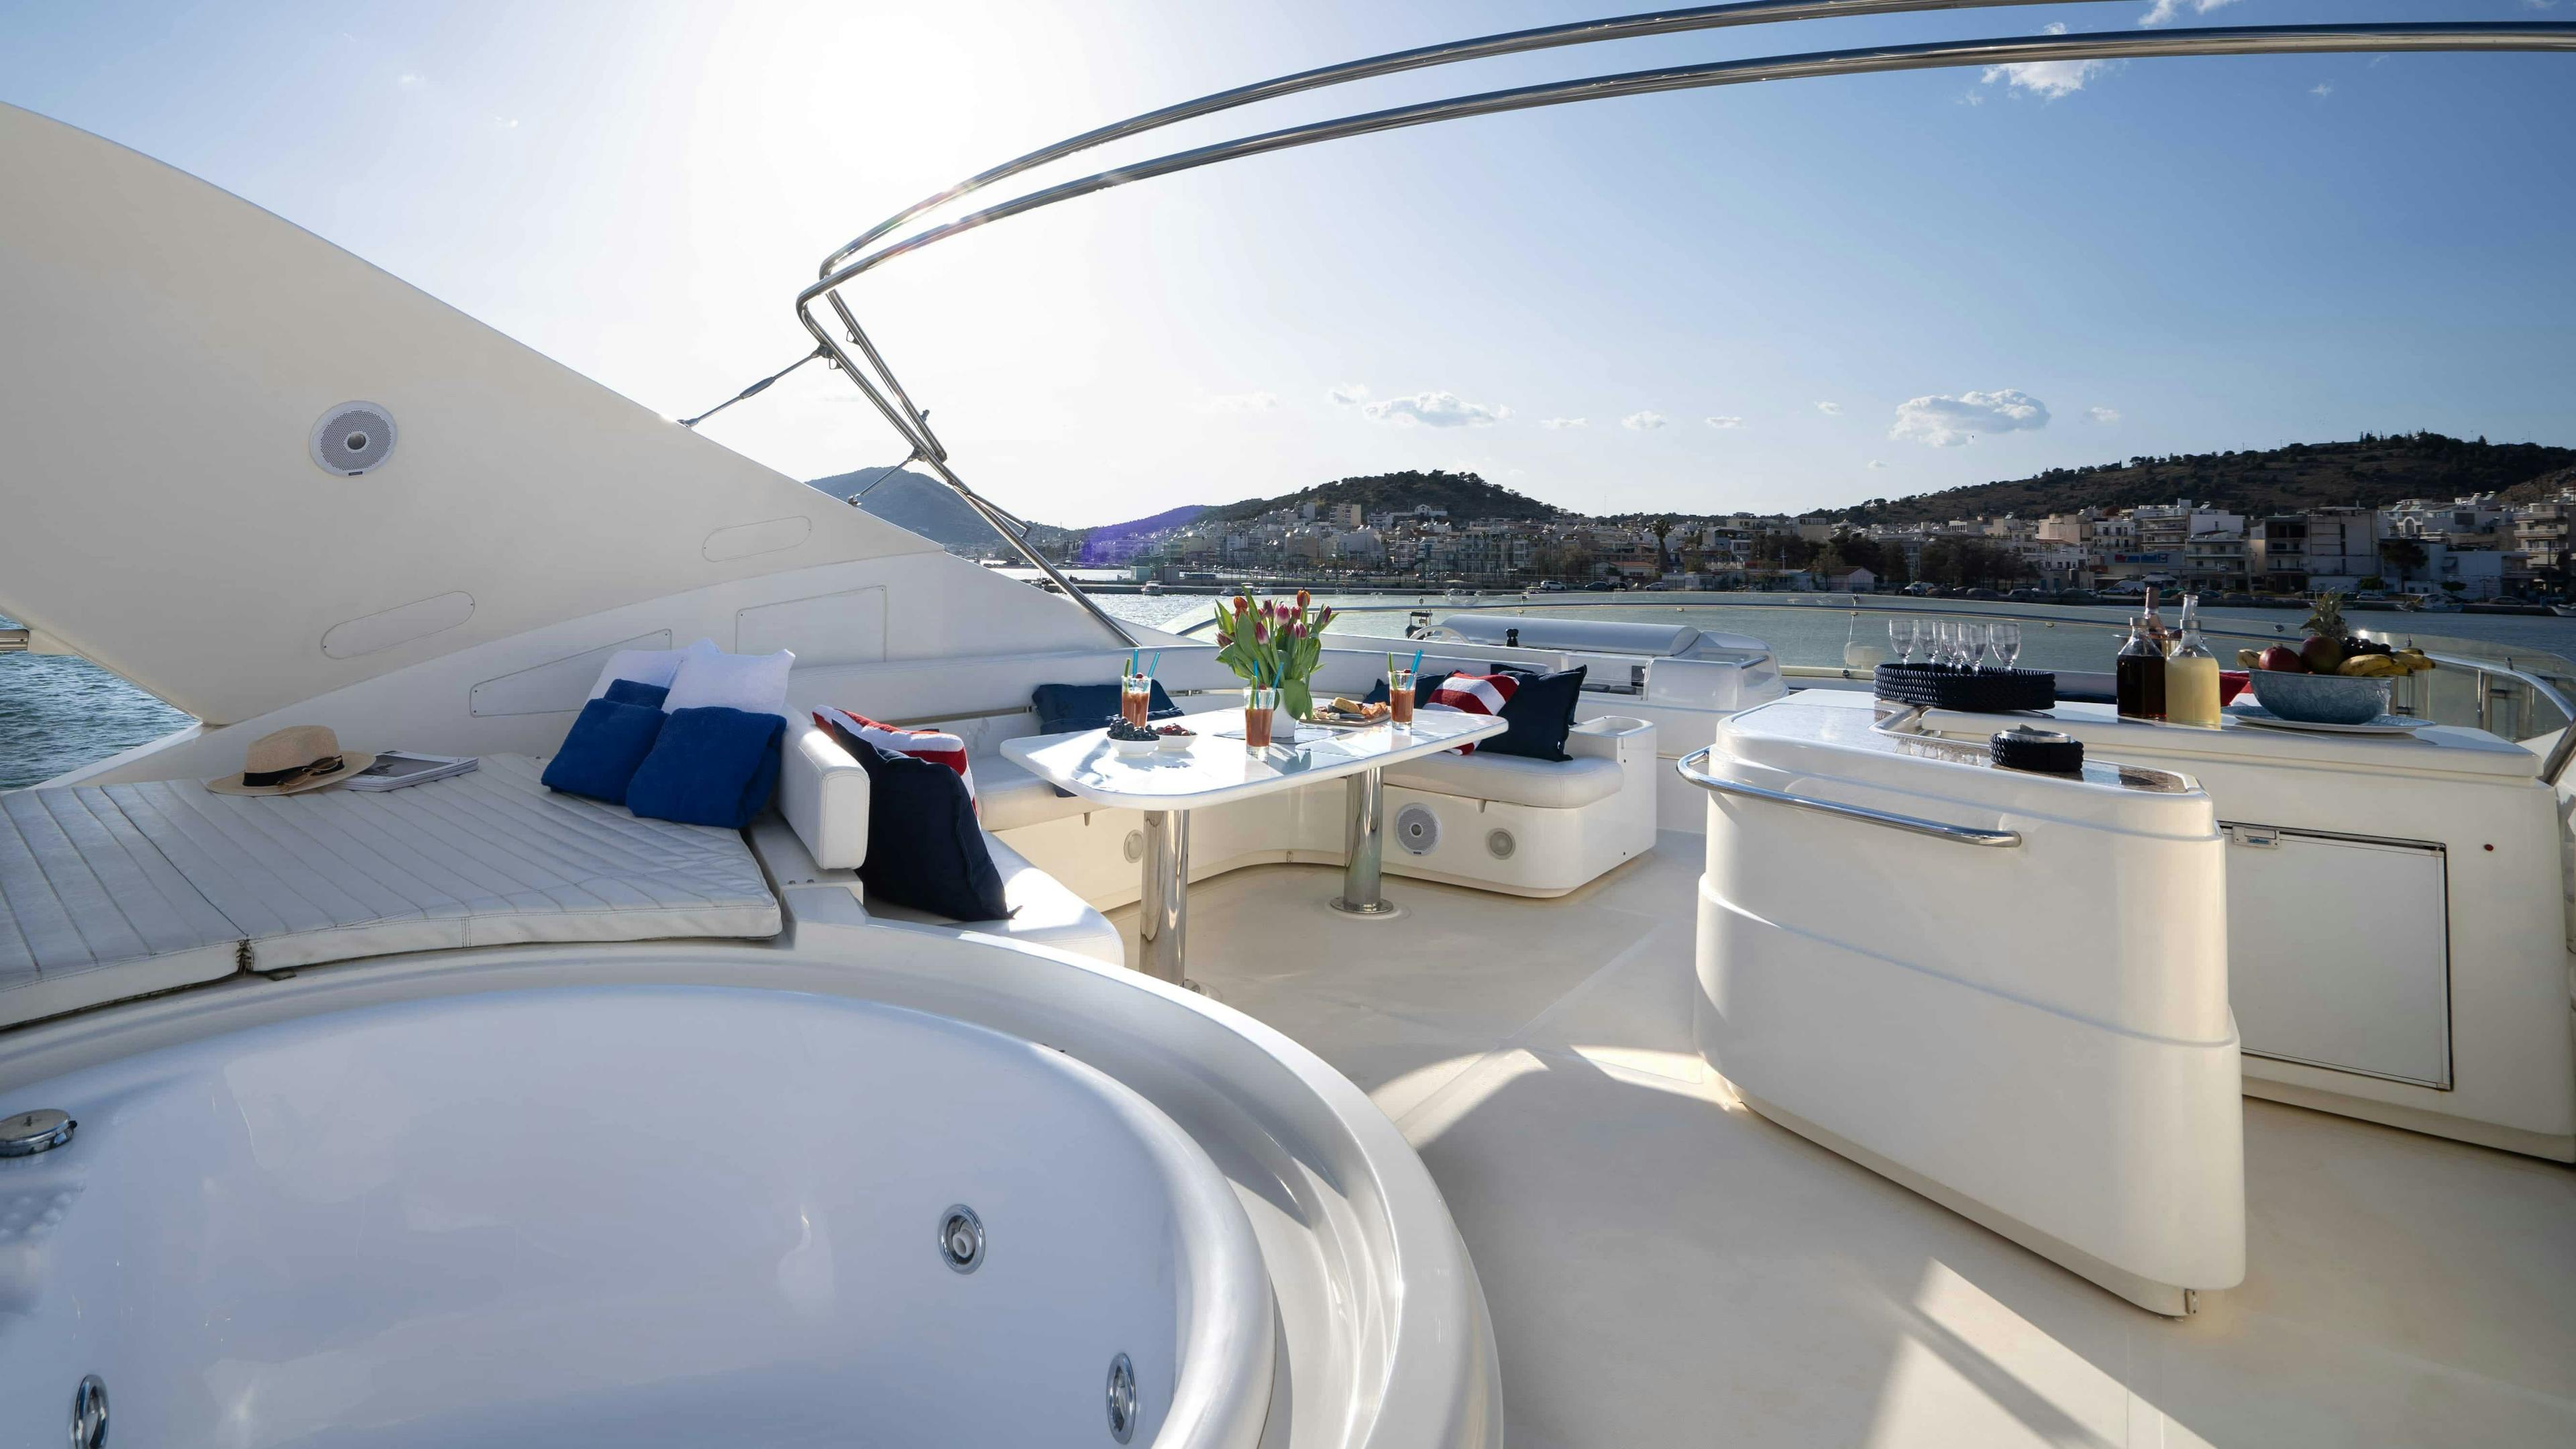 Book Ferretti Yachts 880 Motor yacht for bareboat charter in Athens, Agios Kosmas marina, Athens area/Saronic/Peloponese, Greece with TripYacht!, picture 10